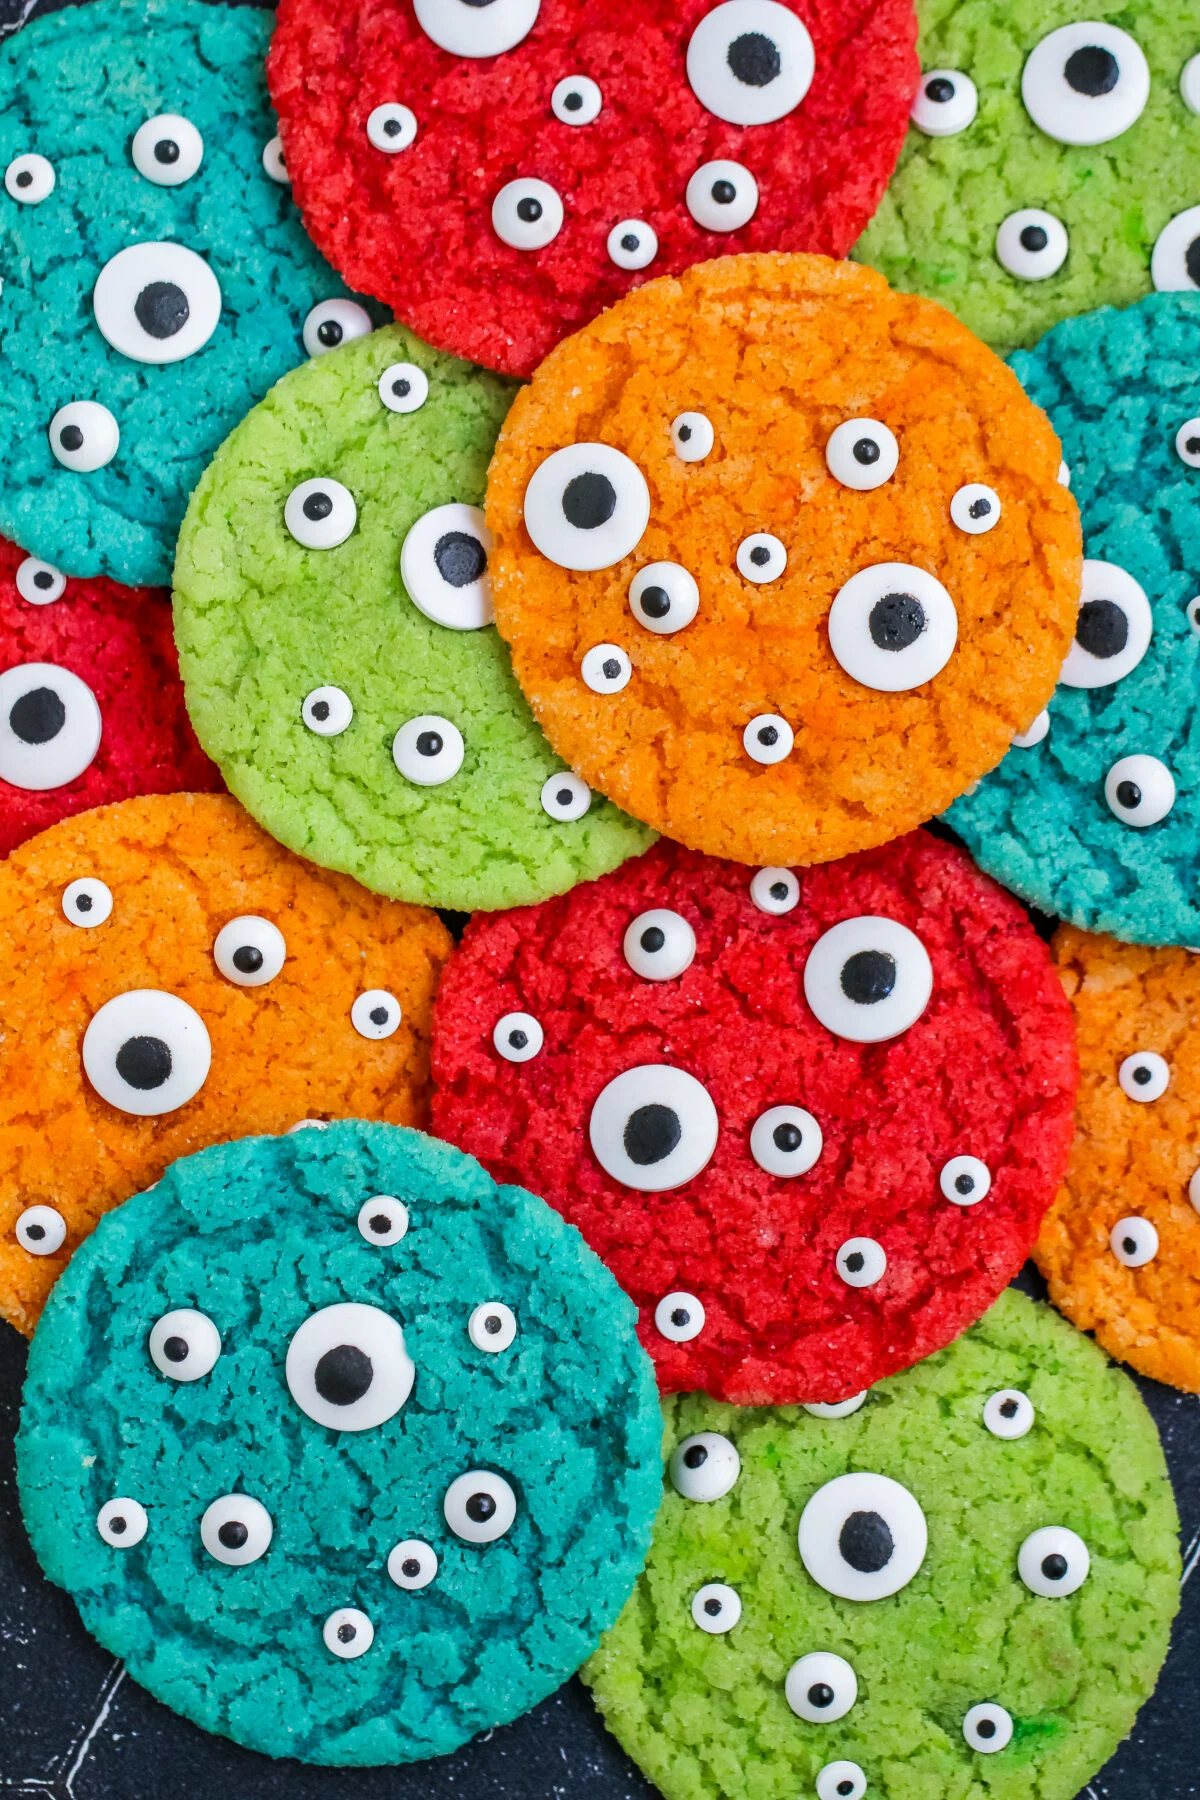 Learn how to make monster eye cookies with this recipe. Perfect for Halloween parties, these spooky treats are quick and easy to prepare!